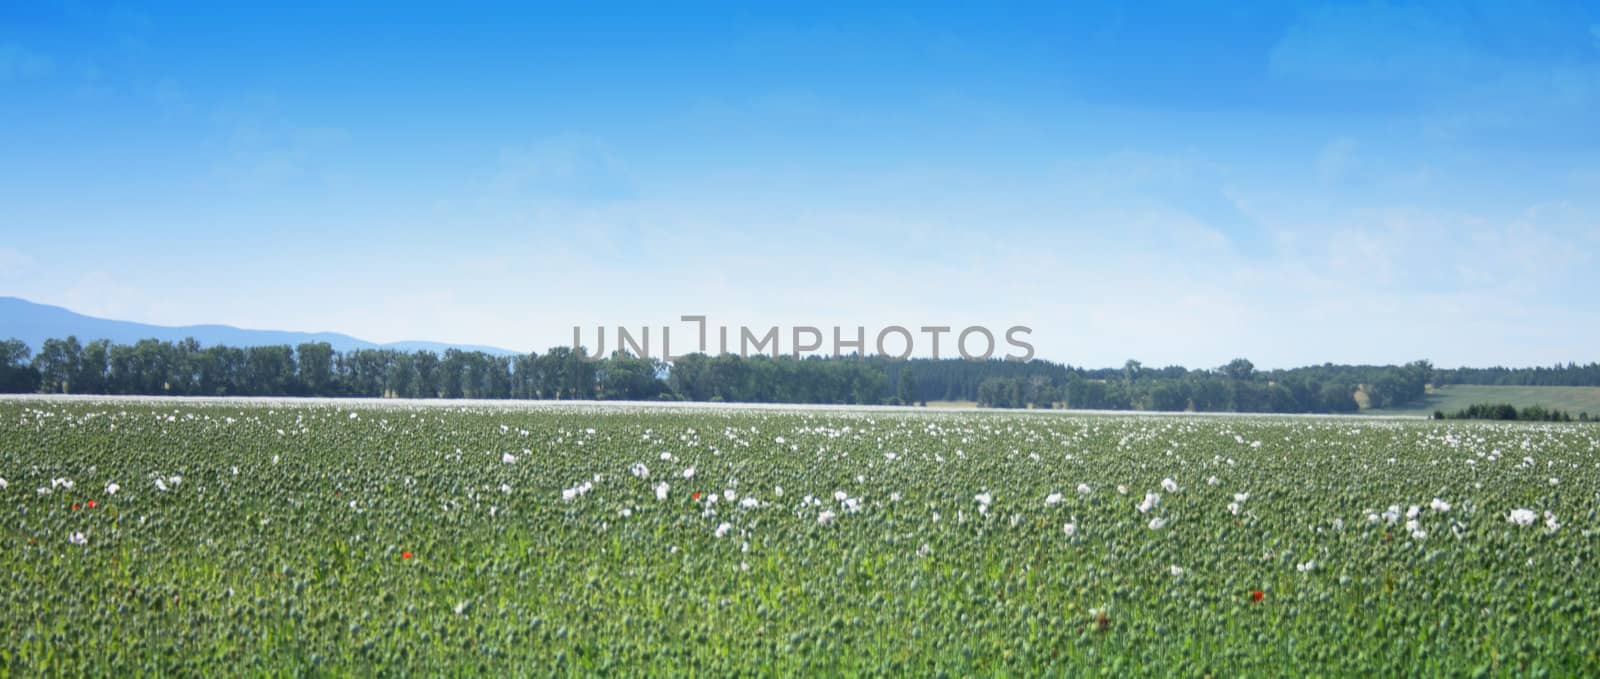 poppy field as very nice natural background